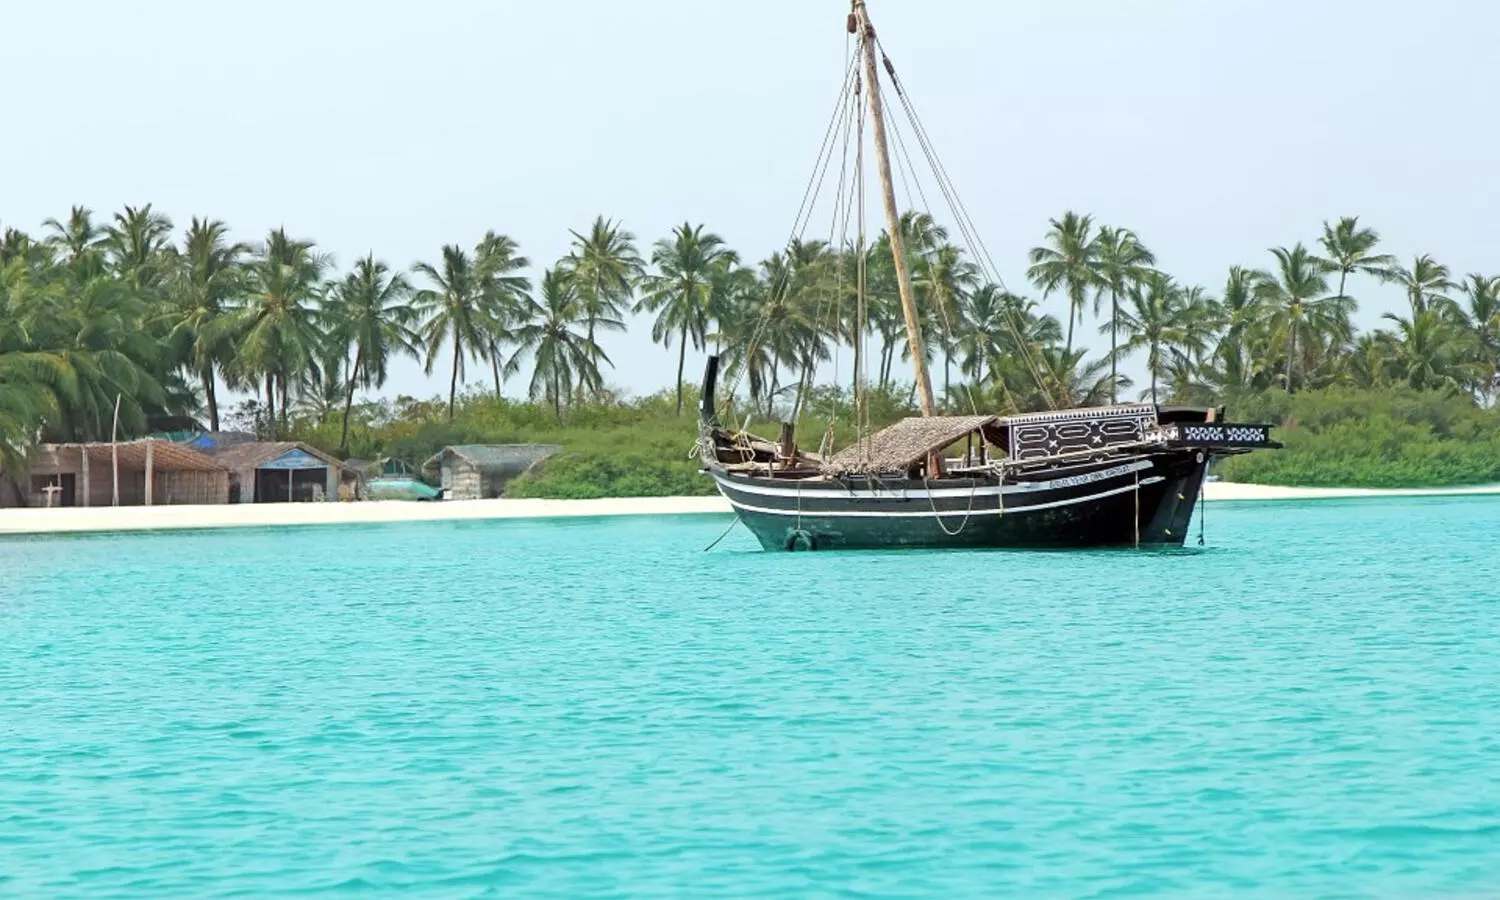 Whats happening in Lakshadweep and why it matters? Heres all you need to know